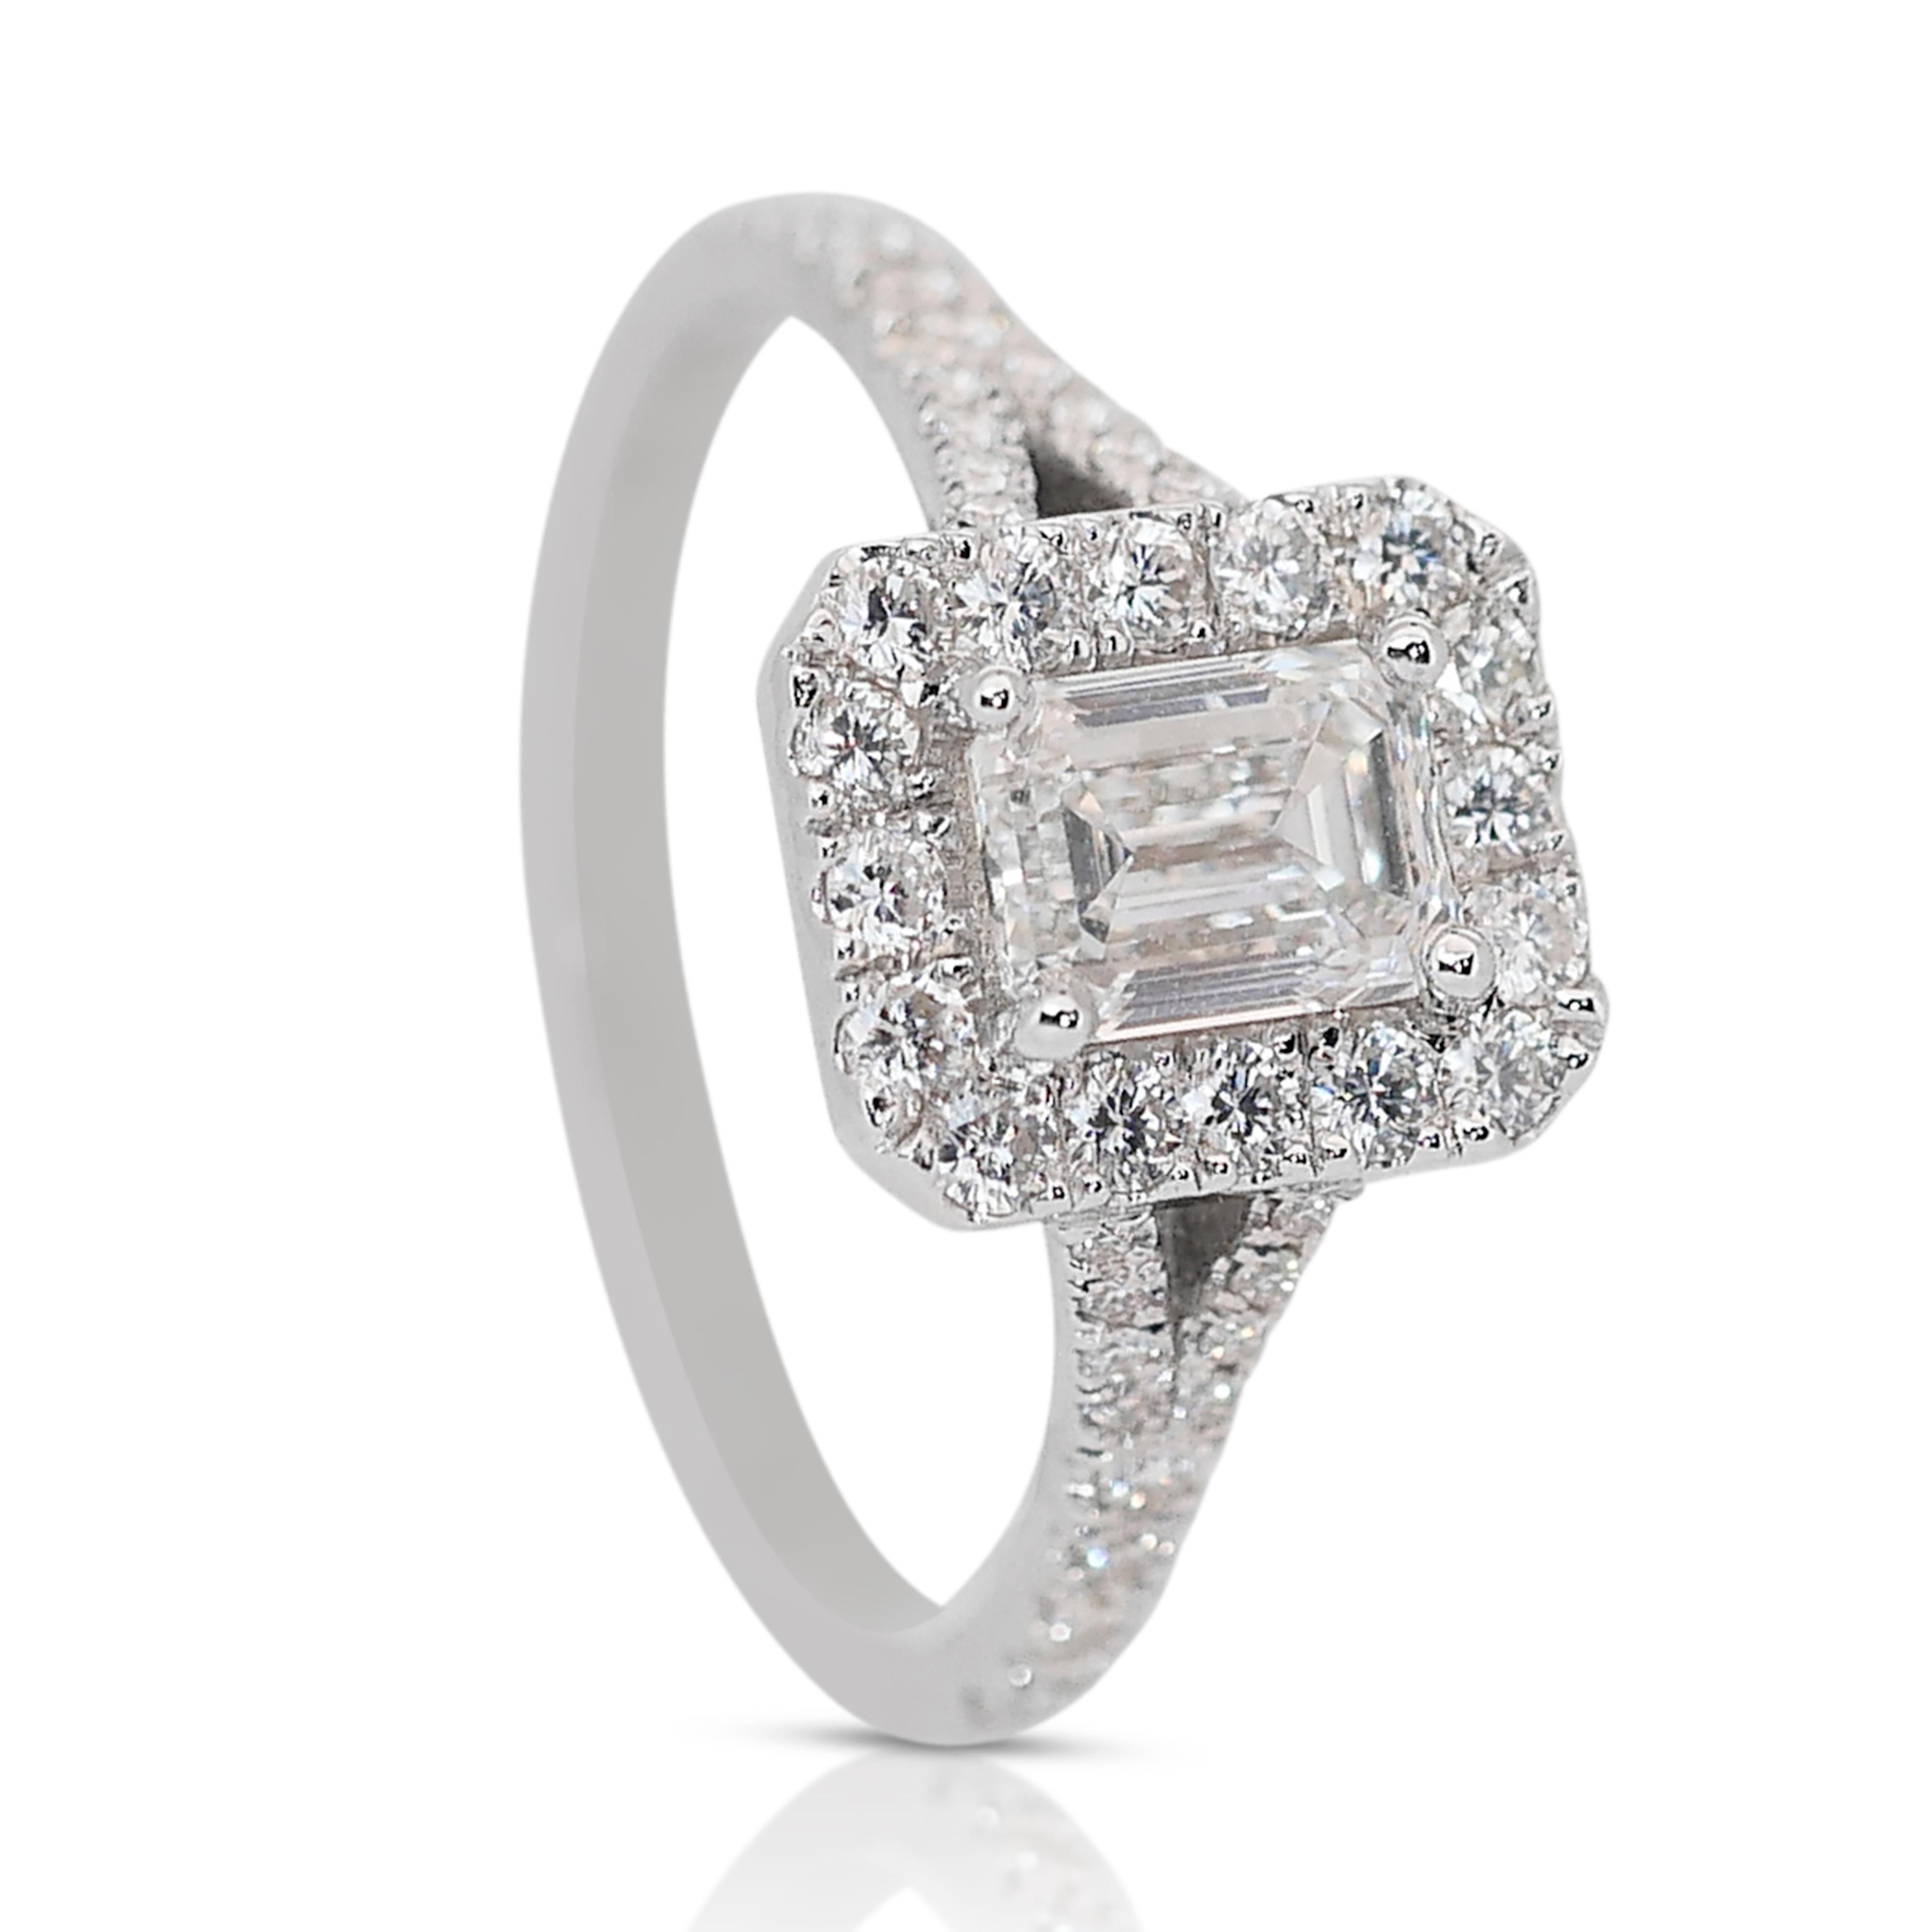 Emerald Cut Captivating 1.15ct Emerald-Cut Diamond Halo Ring in 18k White Gold - GIA  For Sale